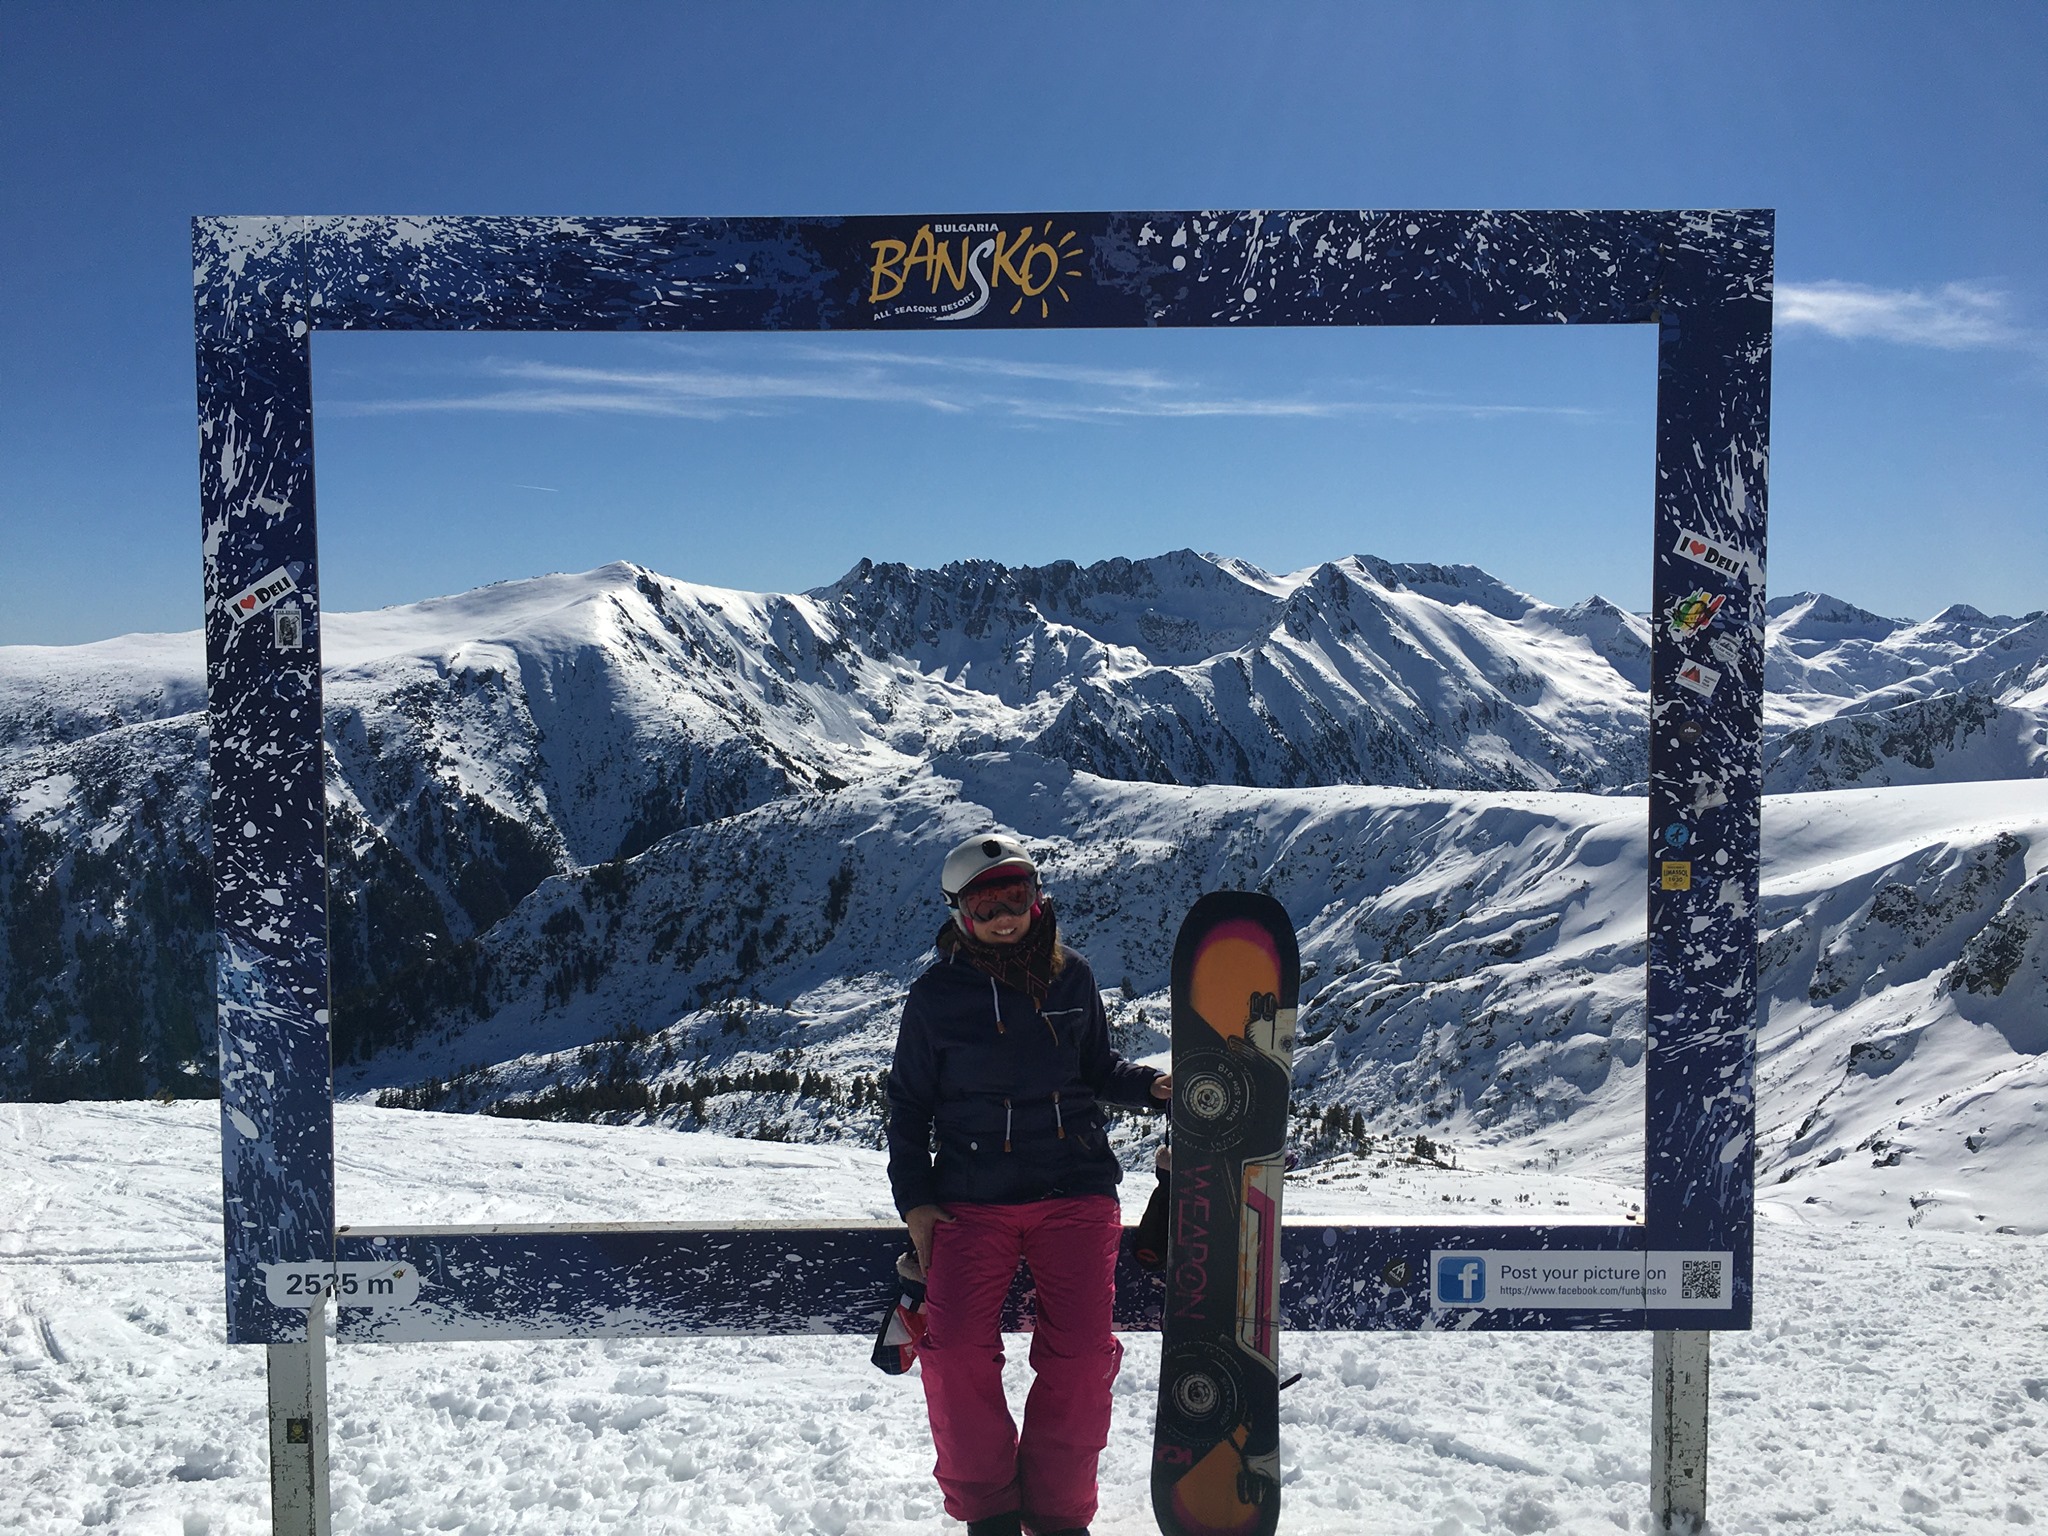 Bank On Bansko For Great Skiing And Value